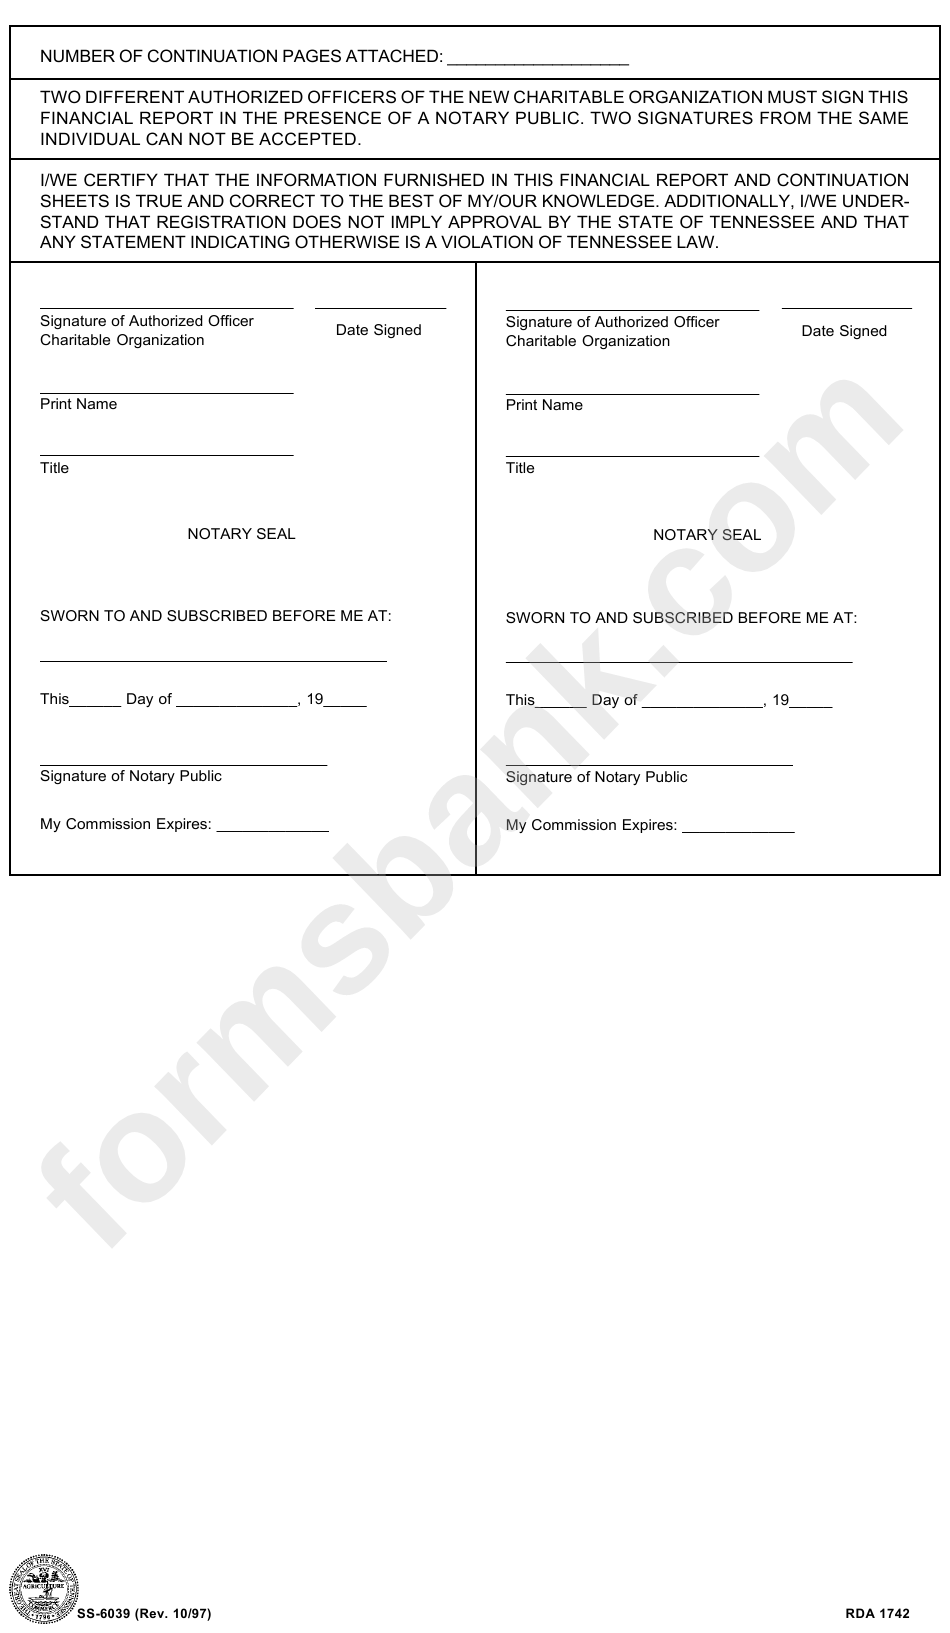 Form Ss-6039 - New Charitable Organization Quarterly Financial Report (Unaudited)